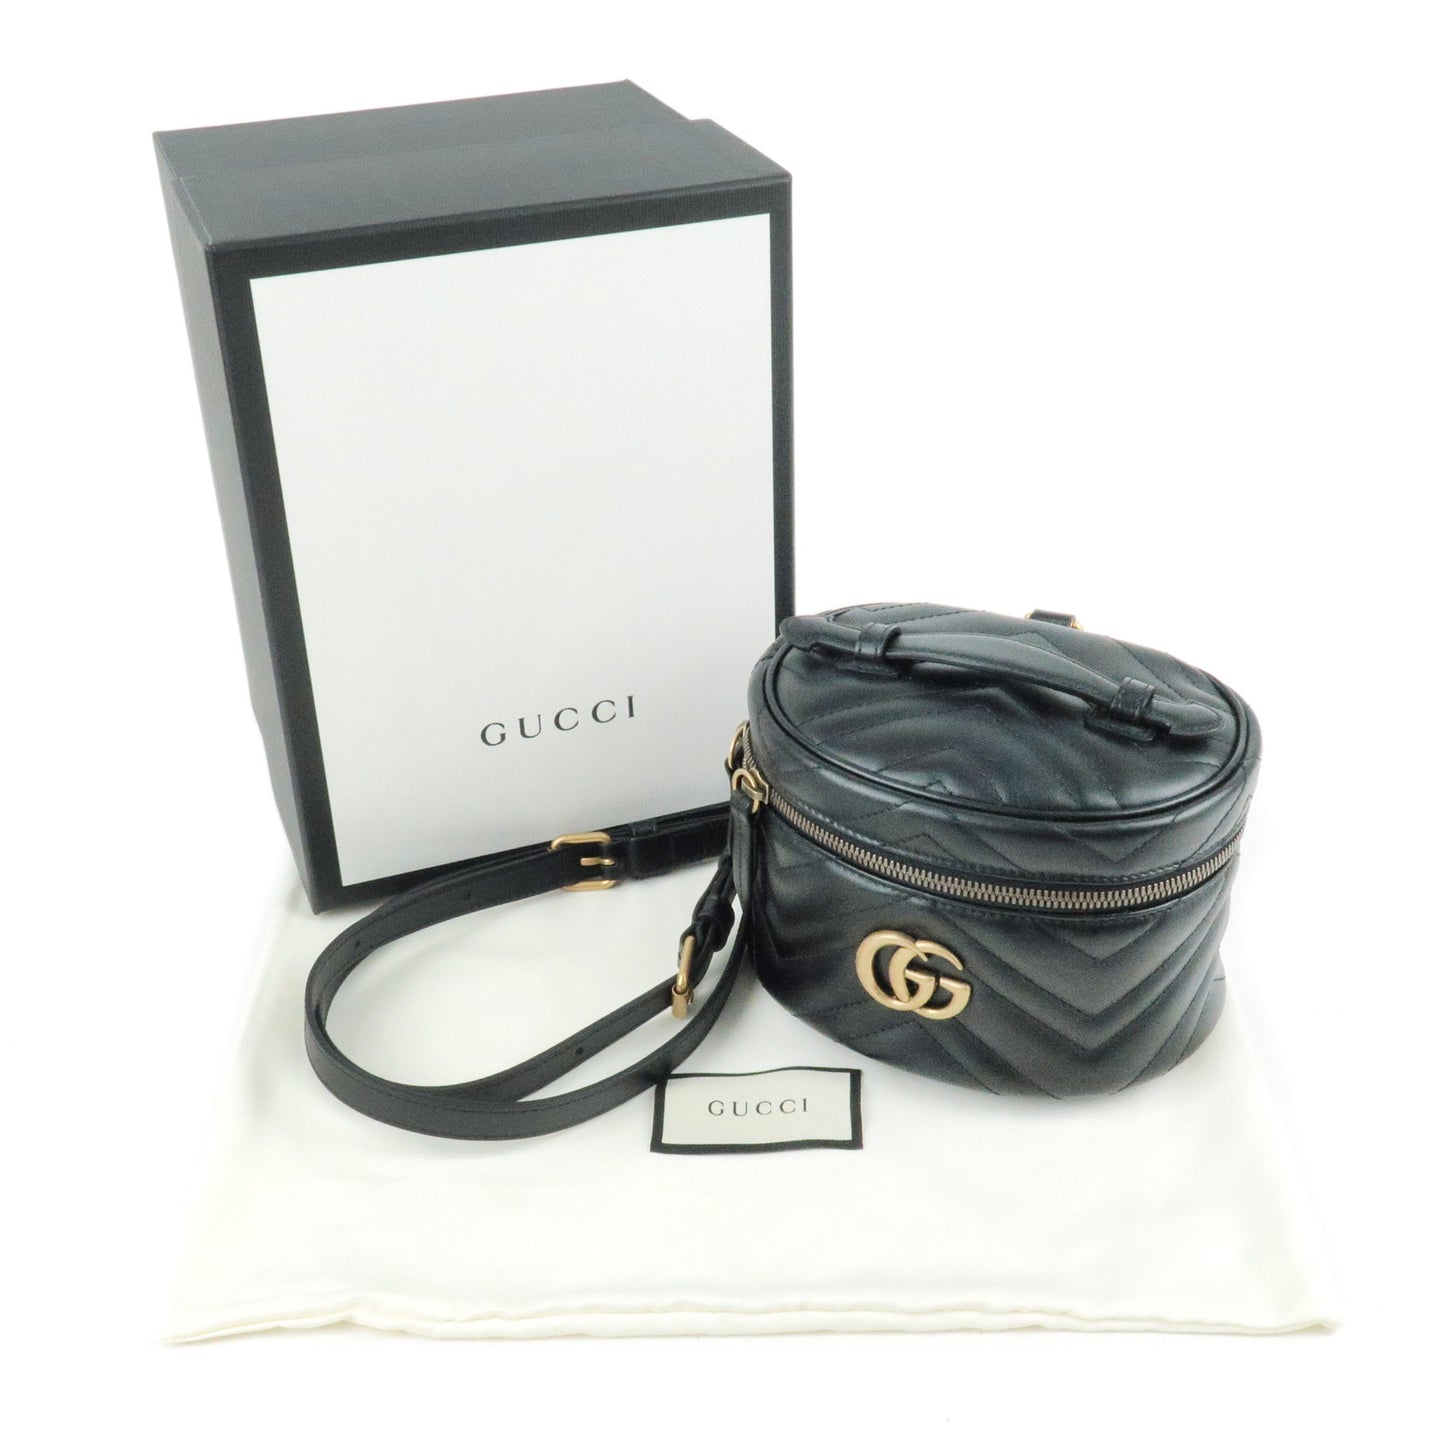 GUCCI GG Marmont Leather Back Pack Ruck Sack Black 598594